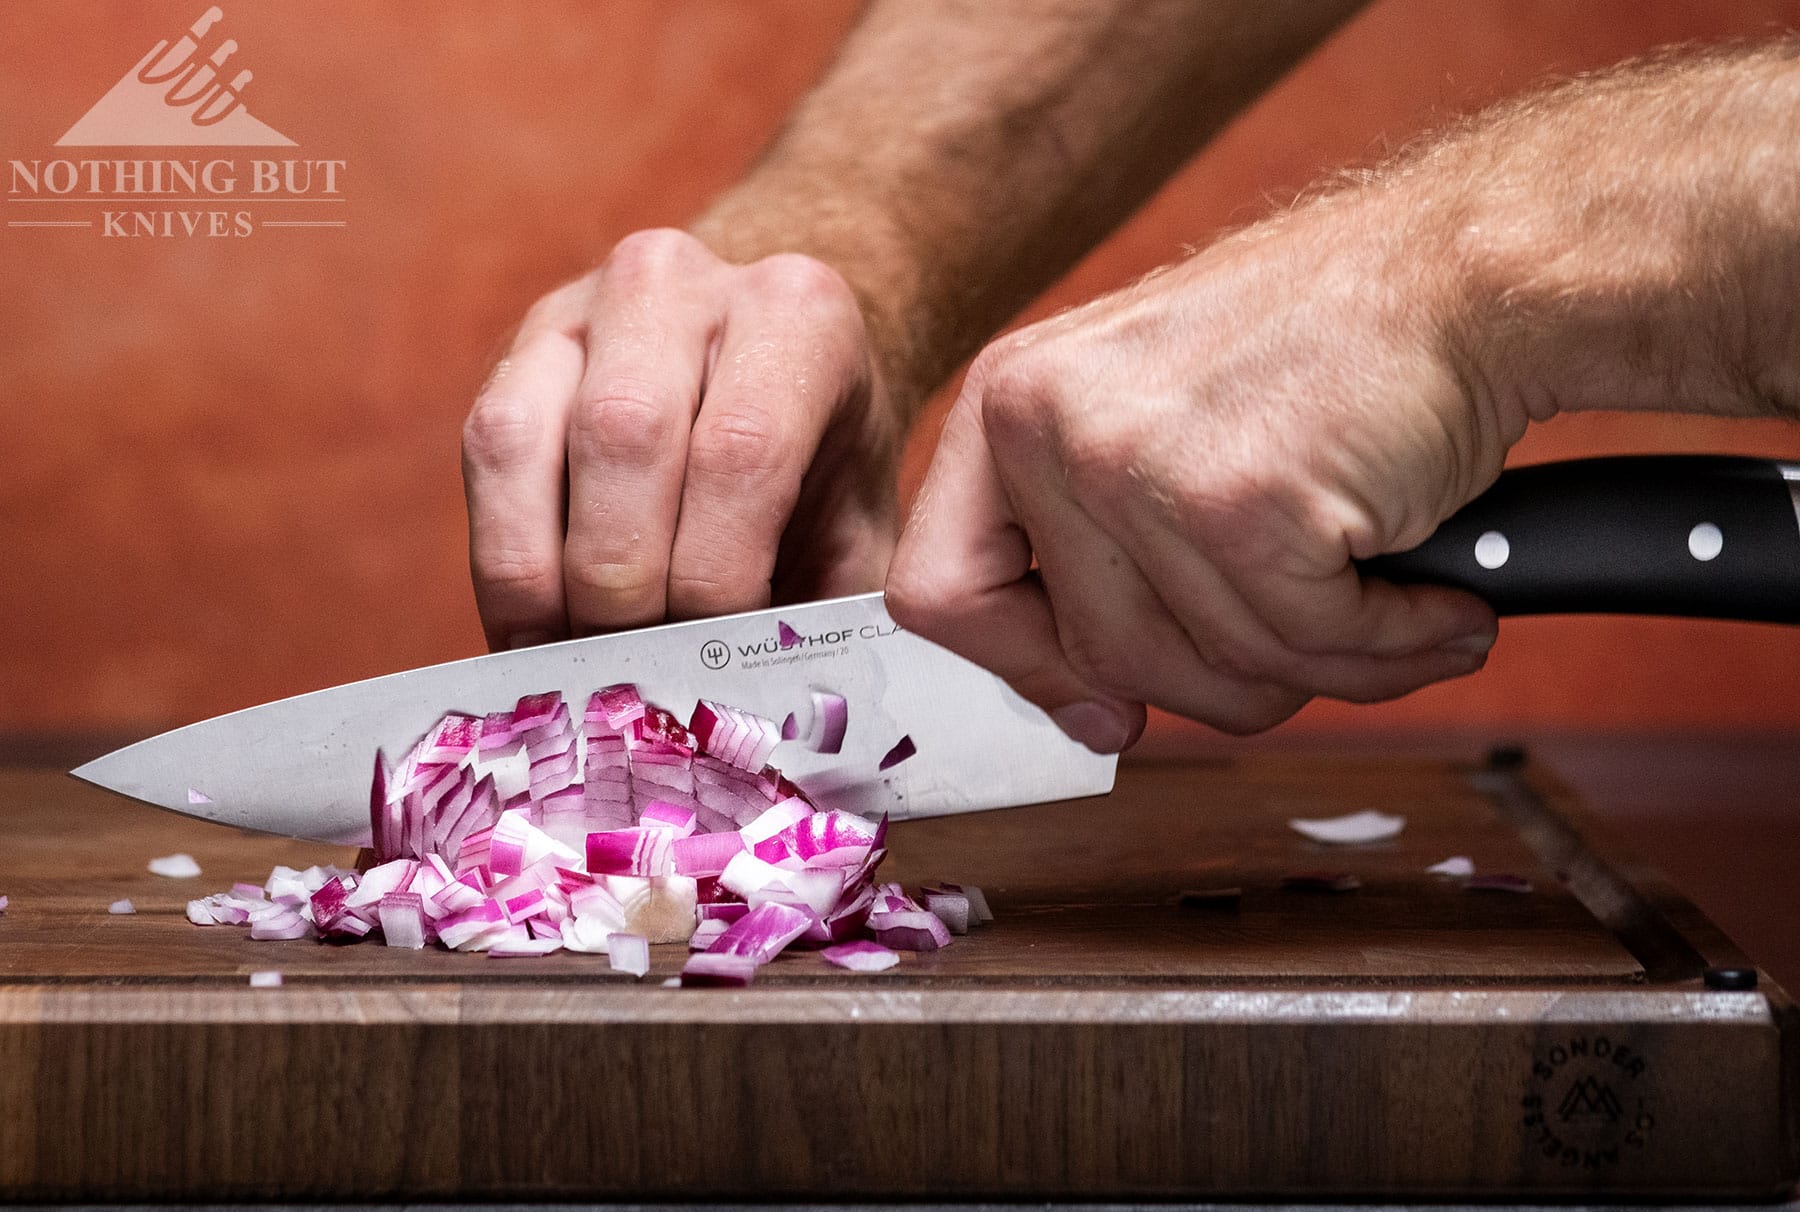 Dicing onions with the Wusthof Classic Ikon Professional chef knife.